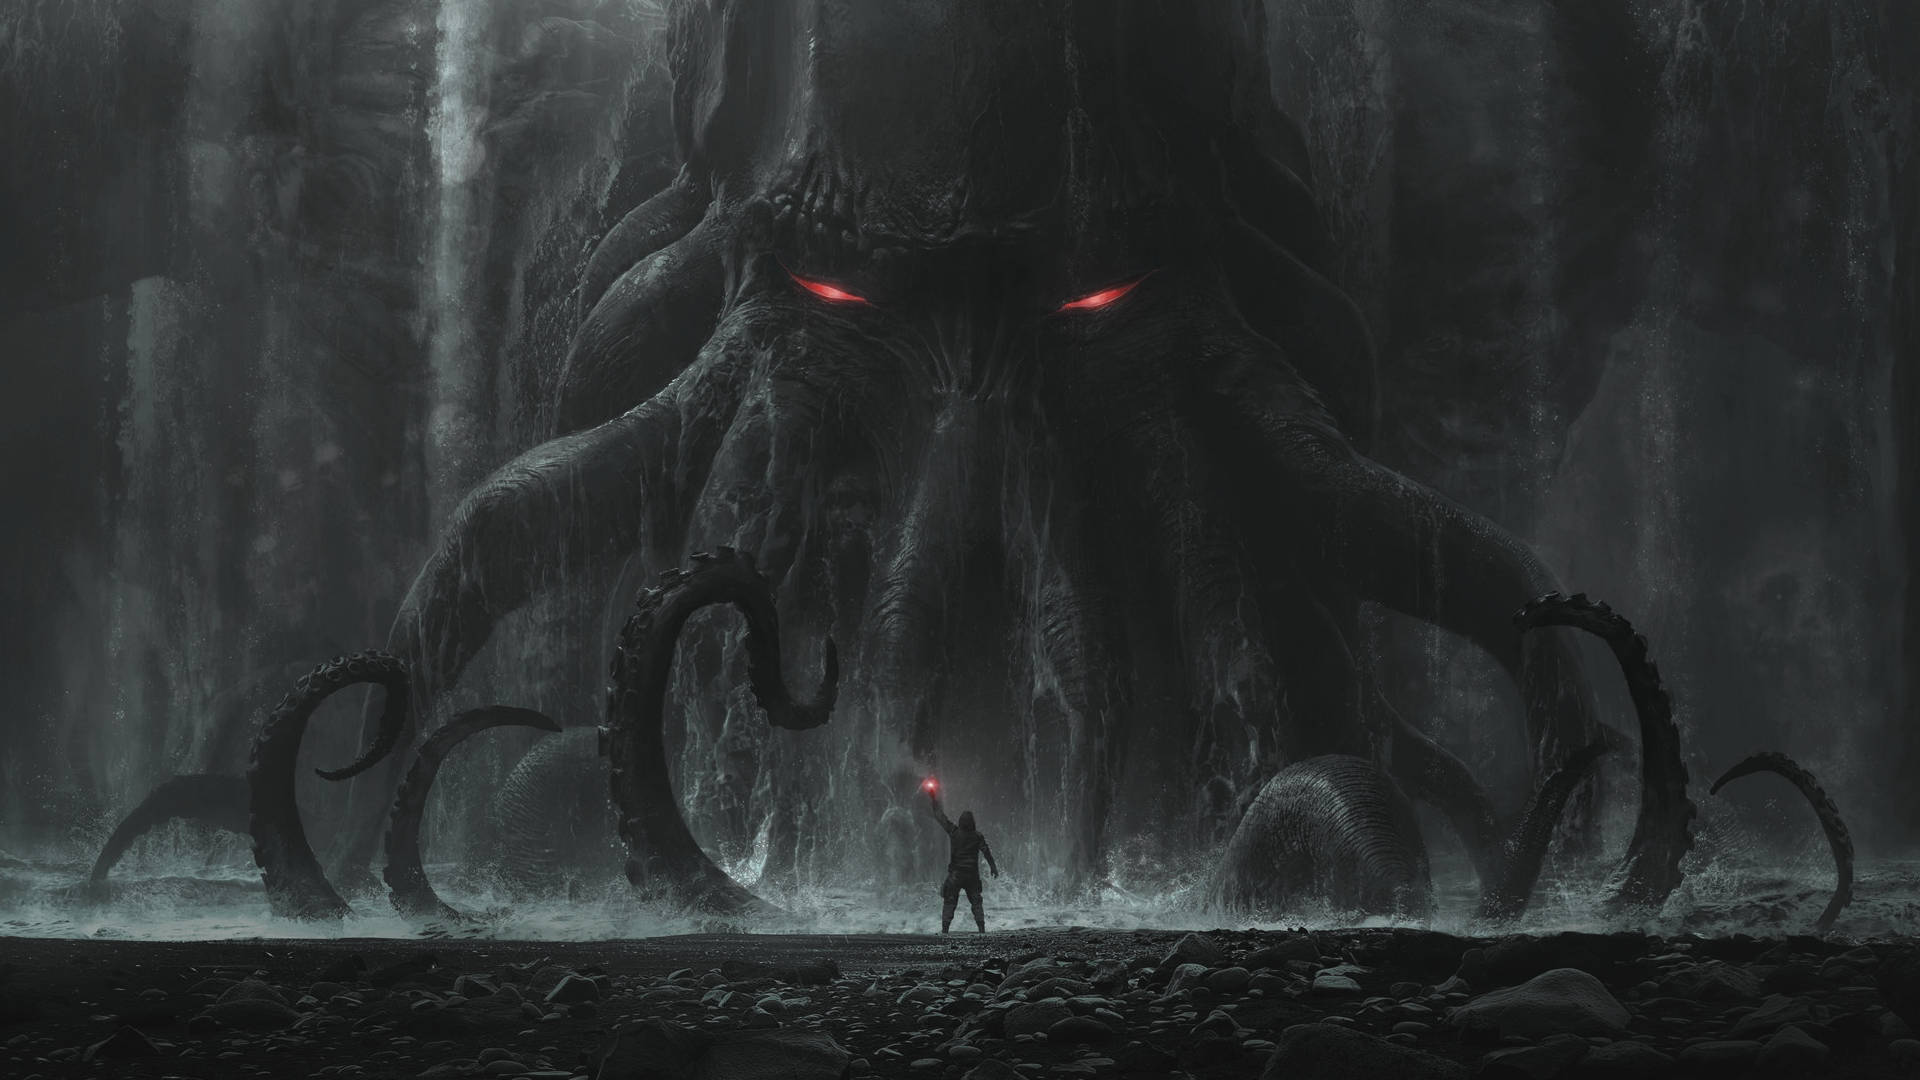 "Cthulhu Rises From The Depths" Wallpaper